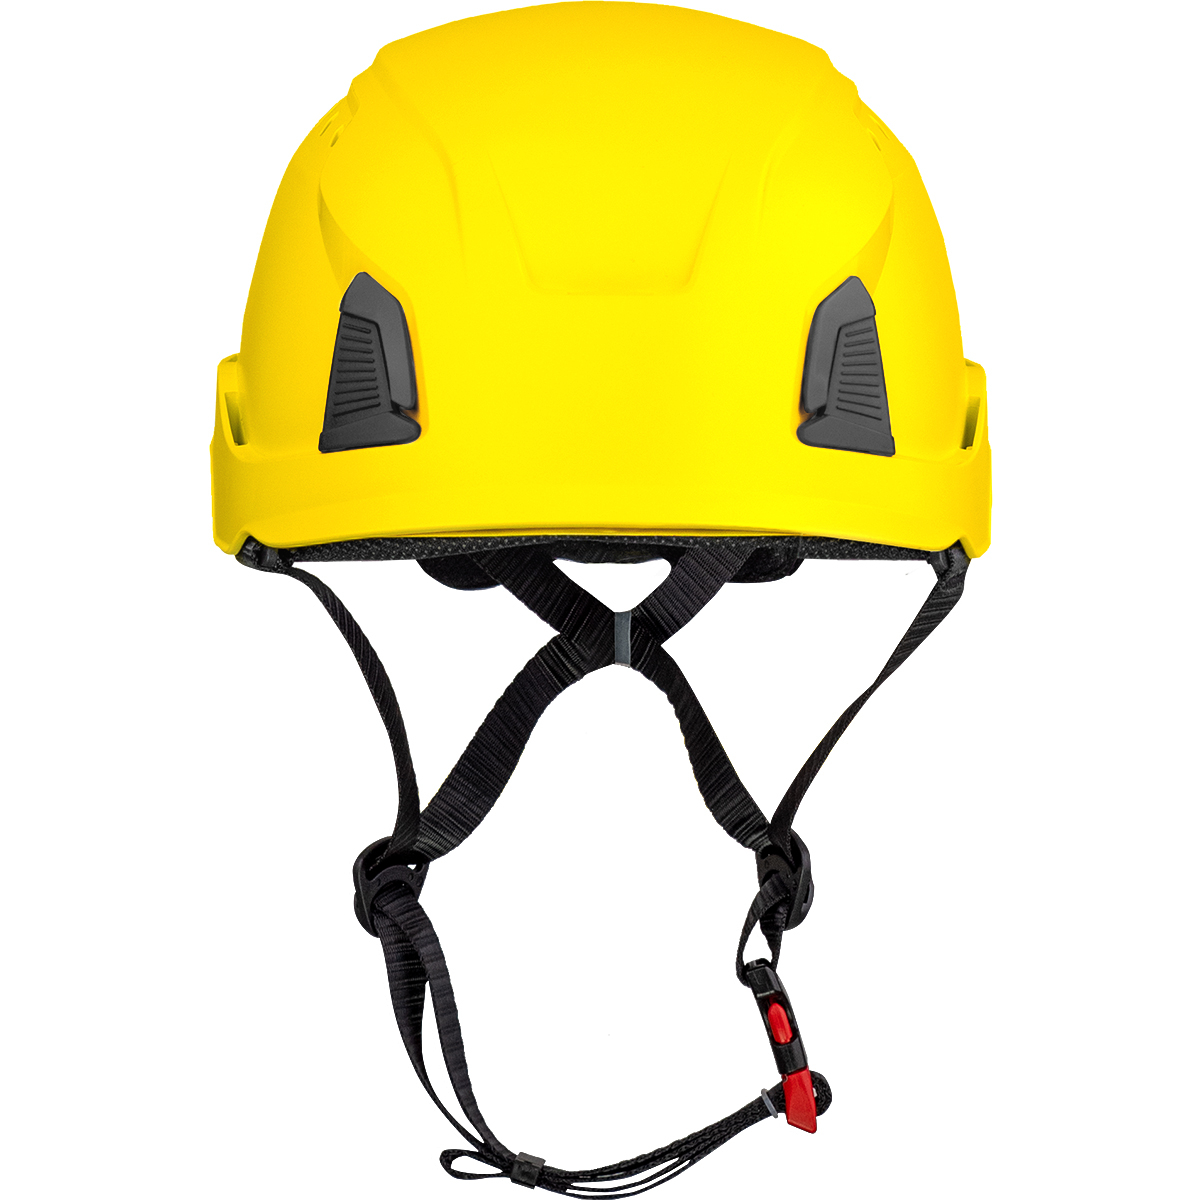 PIP® 280-HP1491RVM-01 Traverse™ Vented, Industrial Climbing Helmet with Mips® Technology, Polycarbonate/ABS Shell, EPS Foam Impact Liner, HDPE Suspension, Wheel Ratchet Adjustment and 4-Point Chin Strap, Yellow